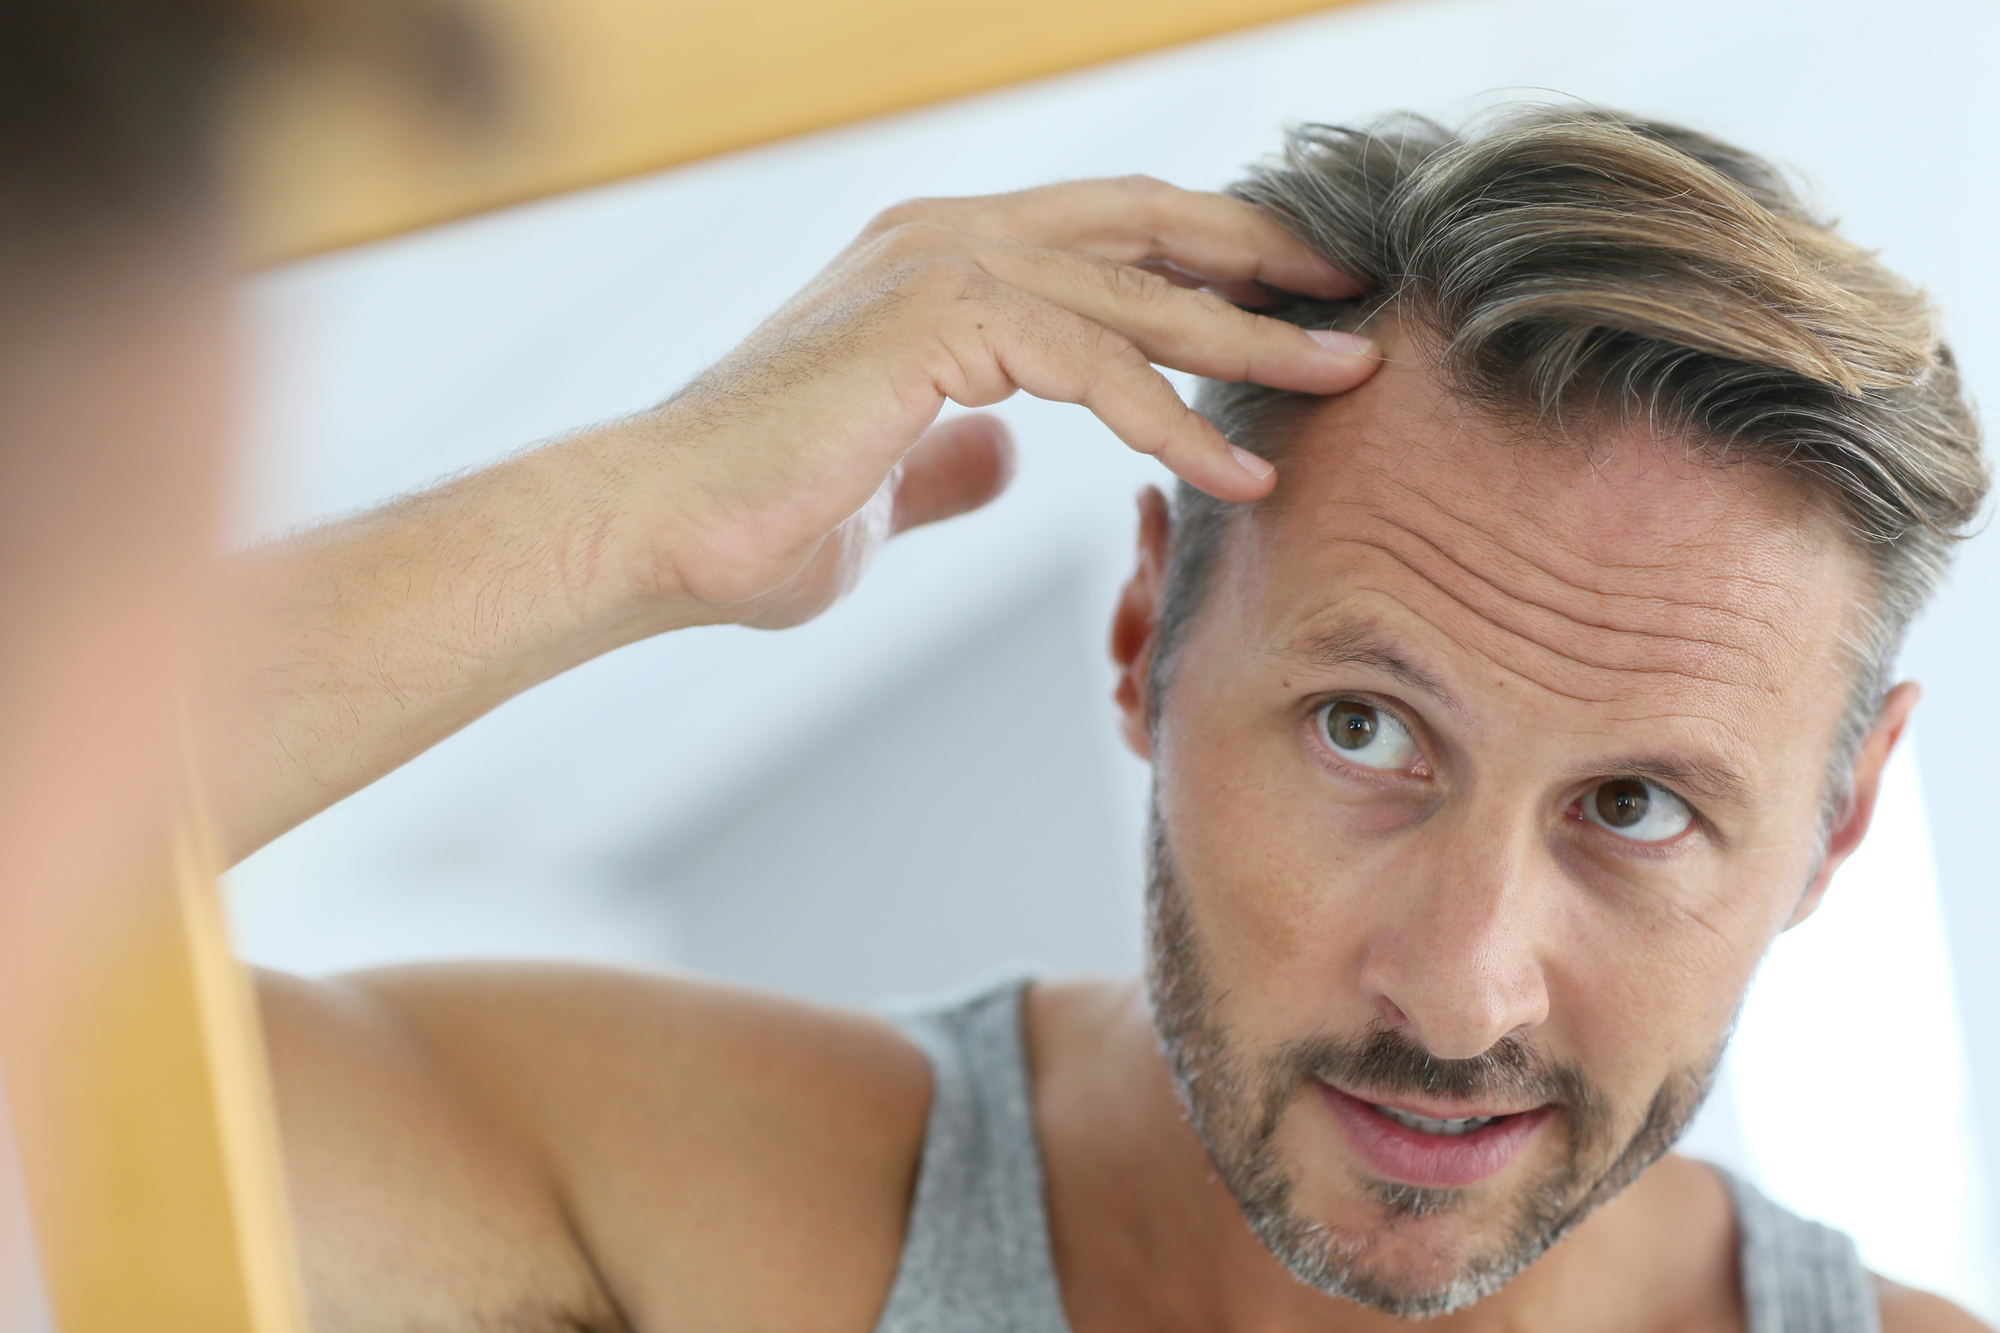 Read more about the article What is Involved with Follicular Unit Excision (FUE) Hair Treatment?